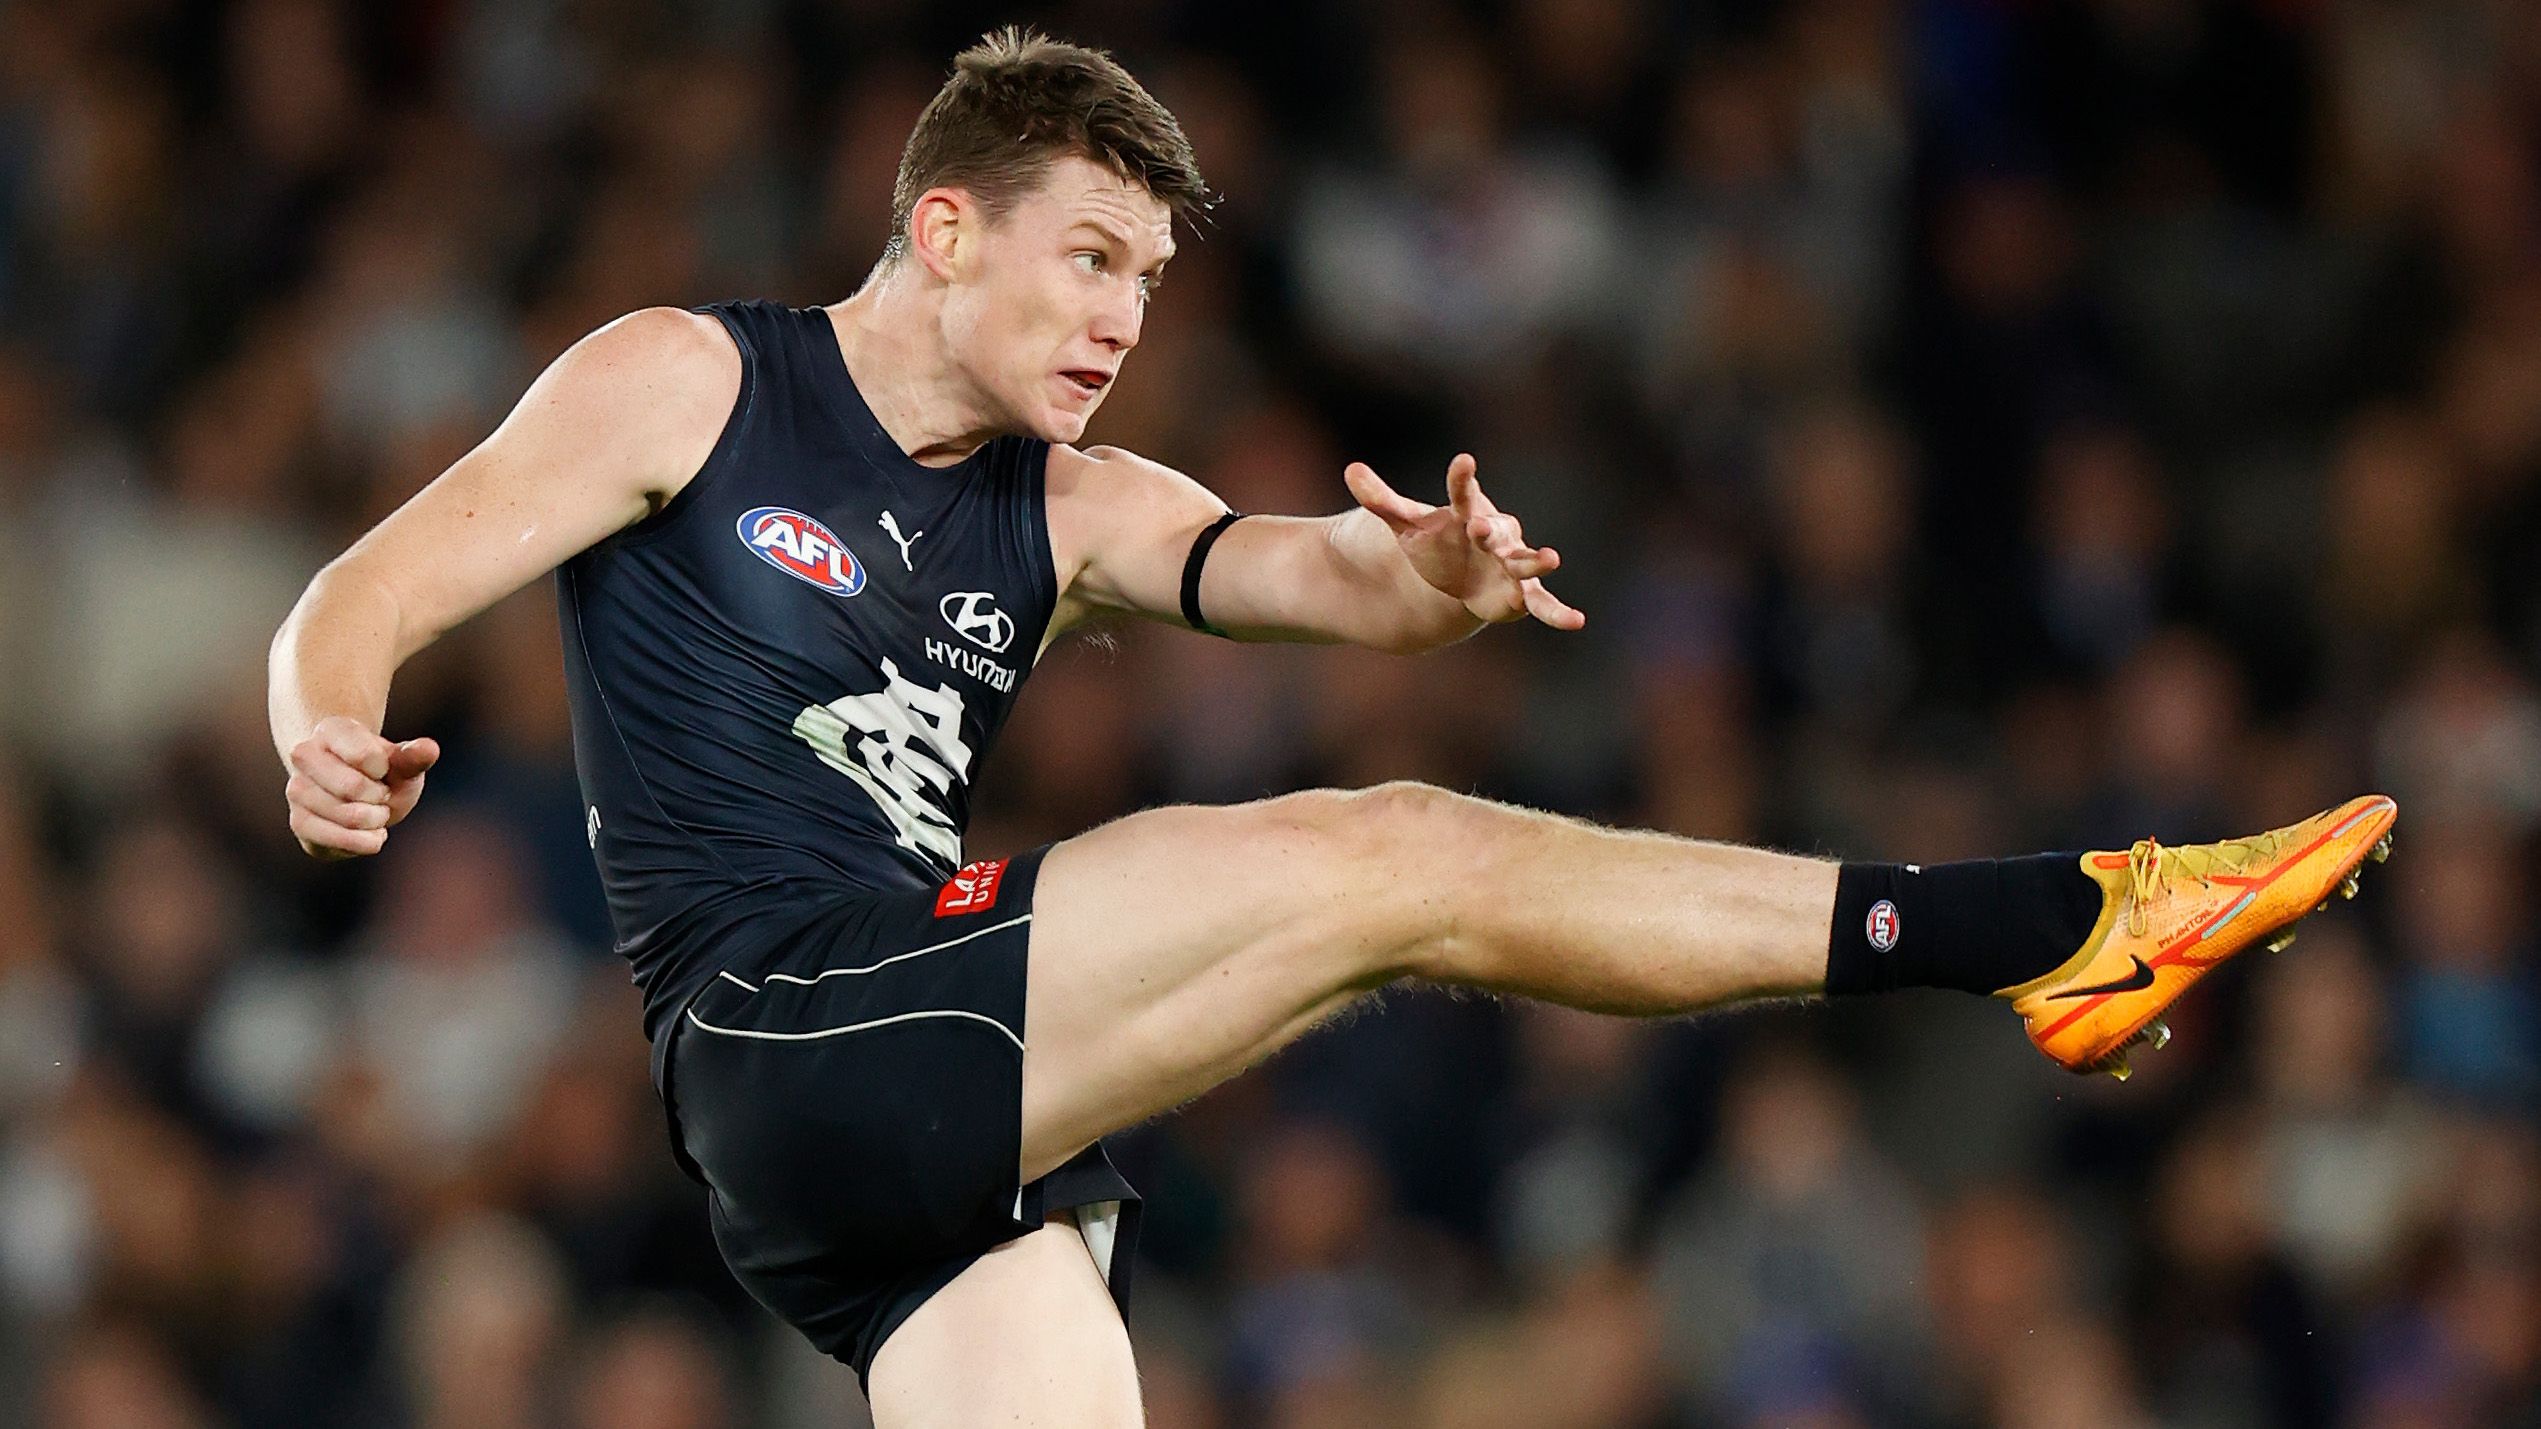 Sam Walsh of the Blues kicks the ball during the 2022 AFL Round 15 match between the Carlton Blues and the Fremantle Dockers at Marvel Stadium on June 25, 2022 in Melbourne, Australia. (Photo by Michael Willson/AFL Photos via Getty Images)